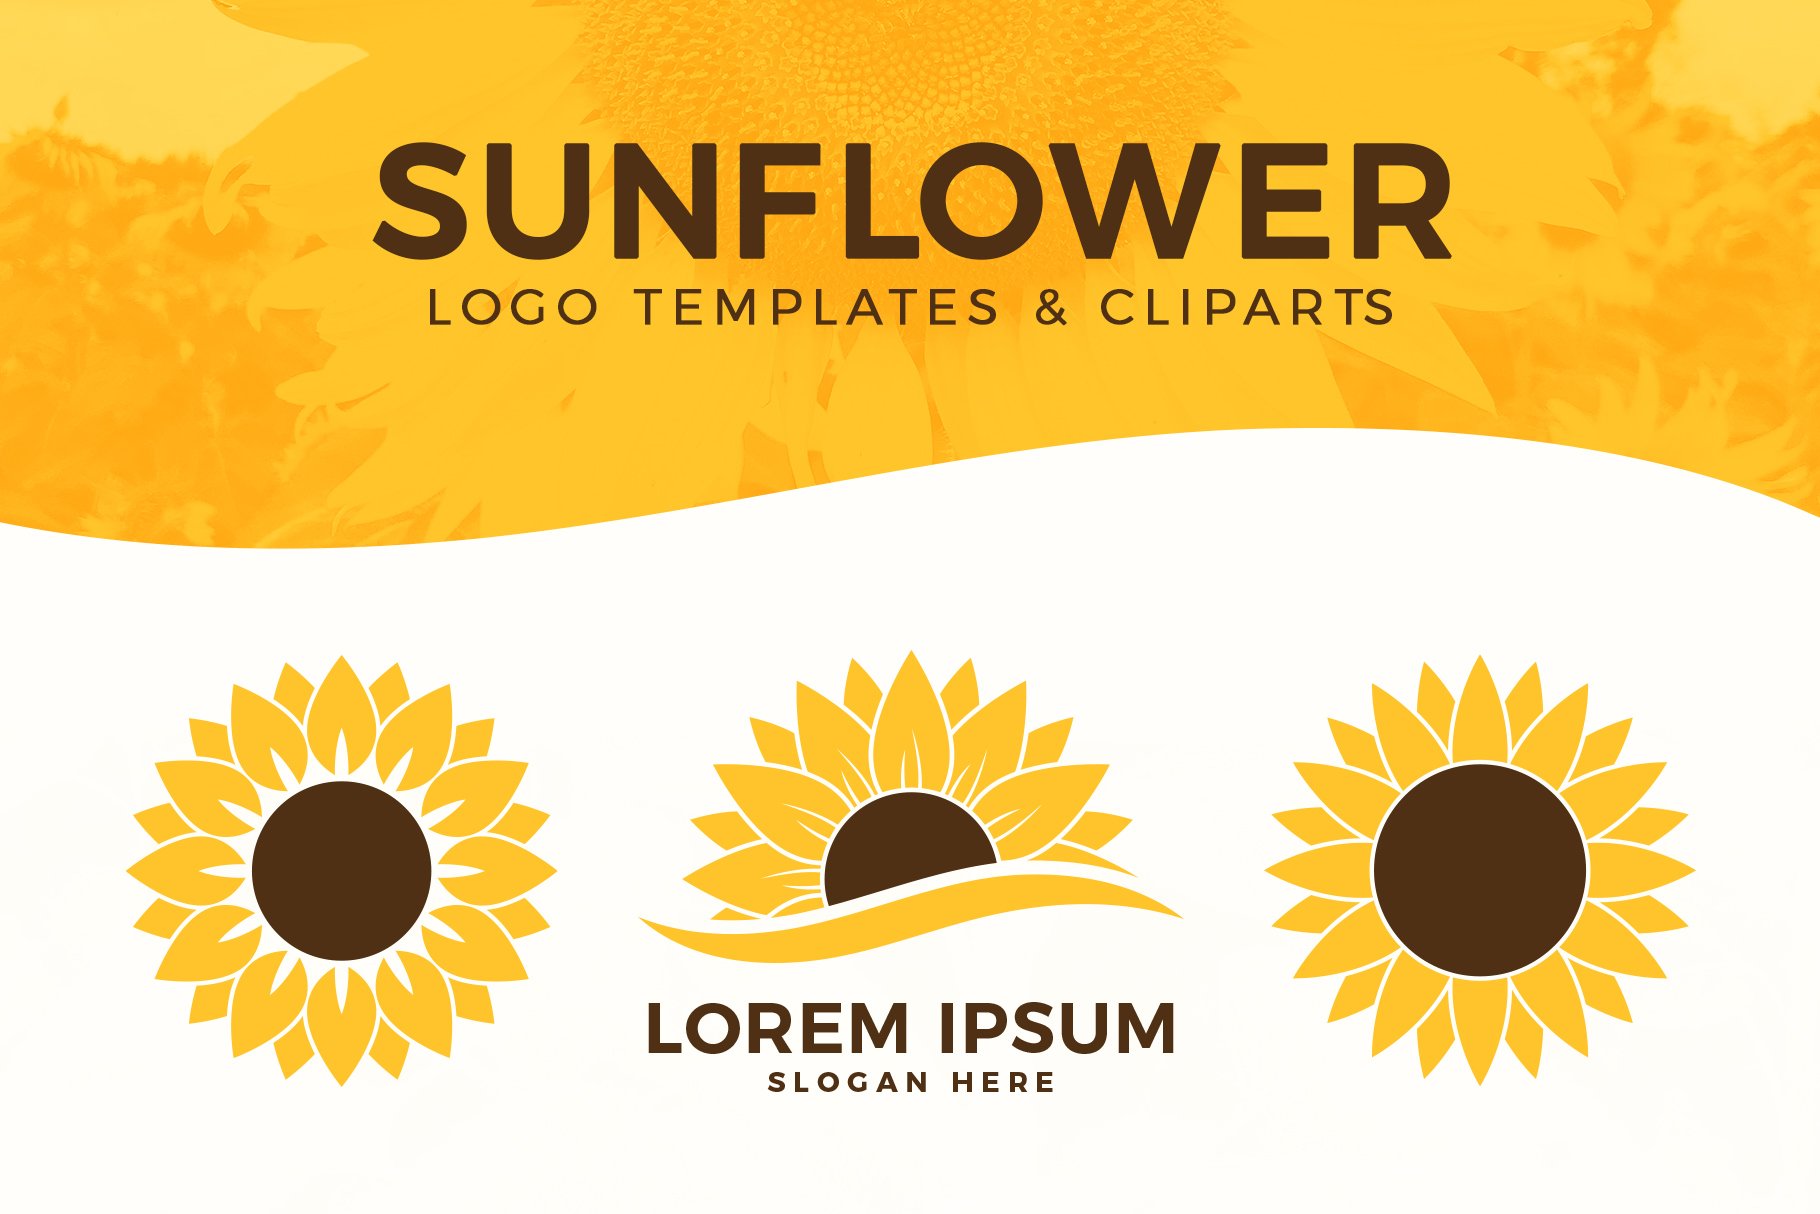 Sunflower Logo Templates & Cliparts cover image.